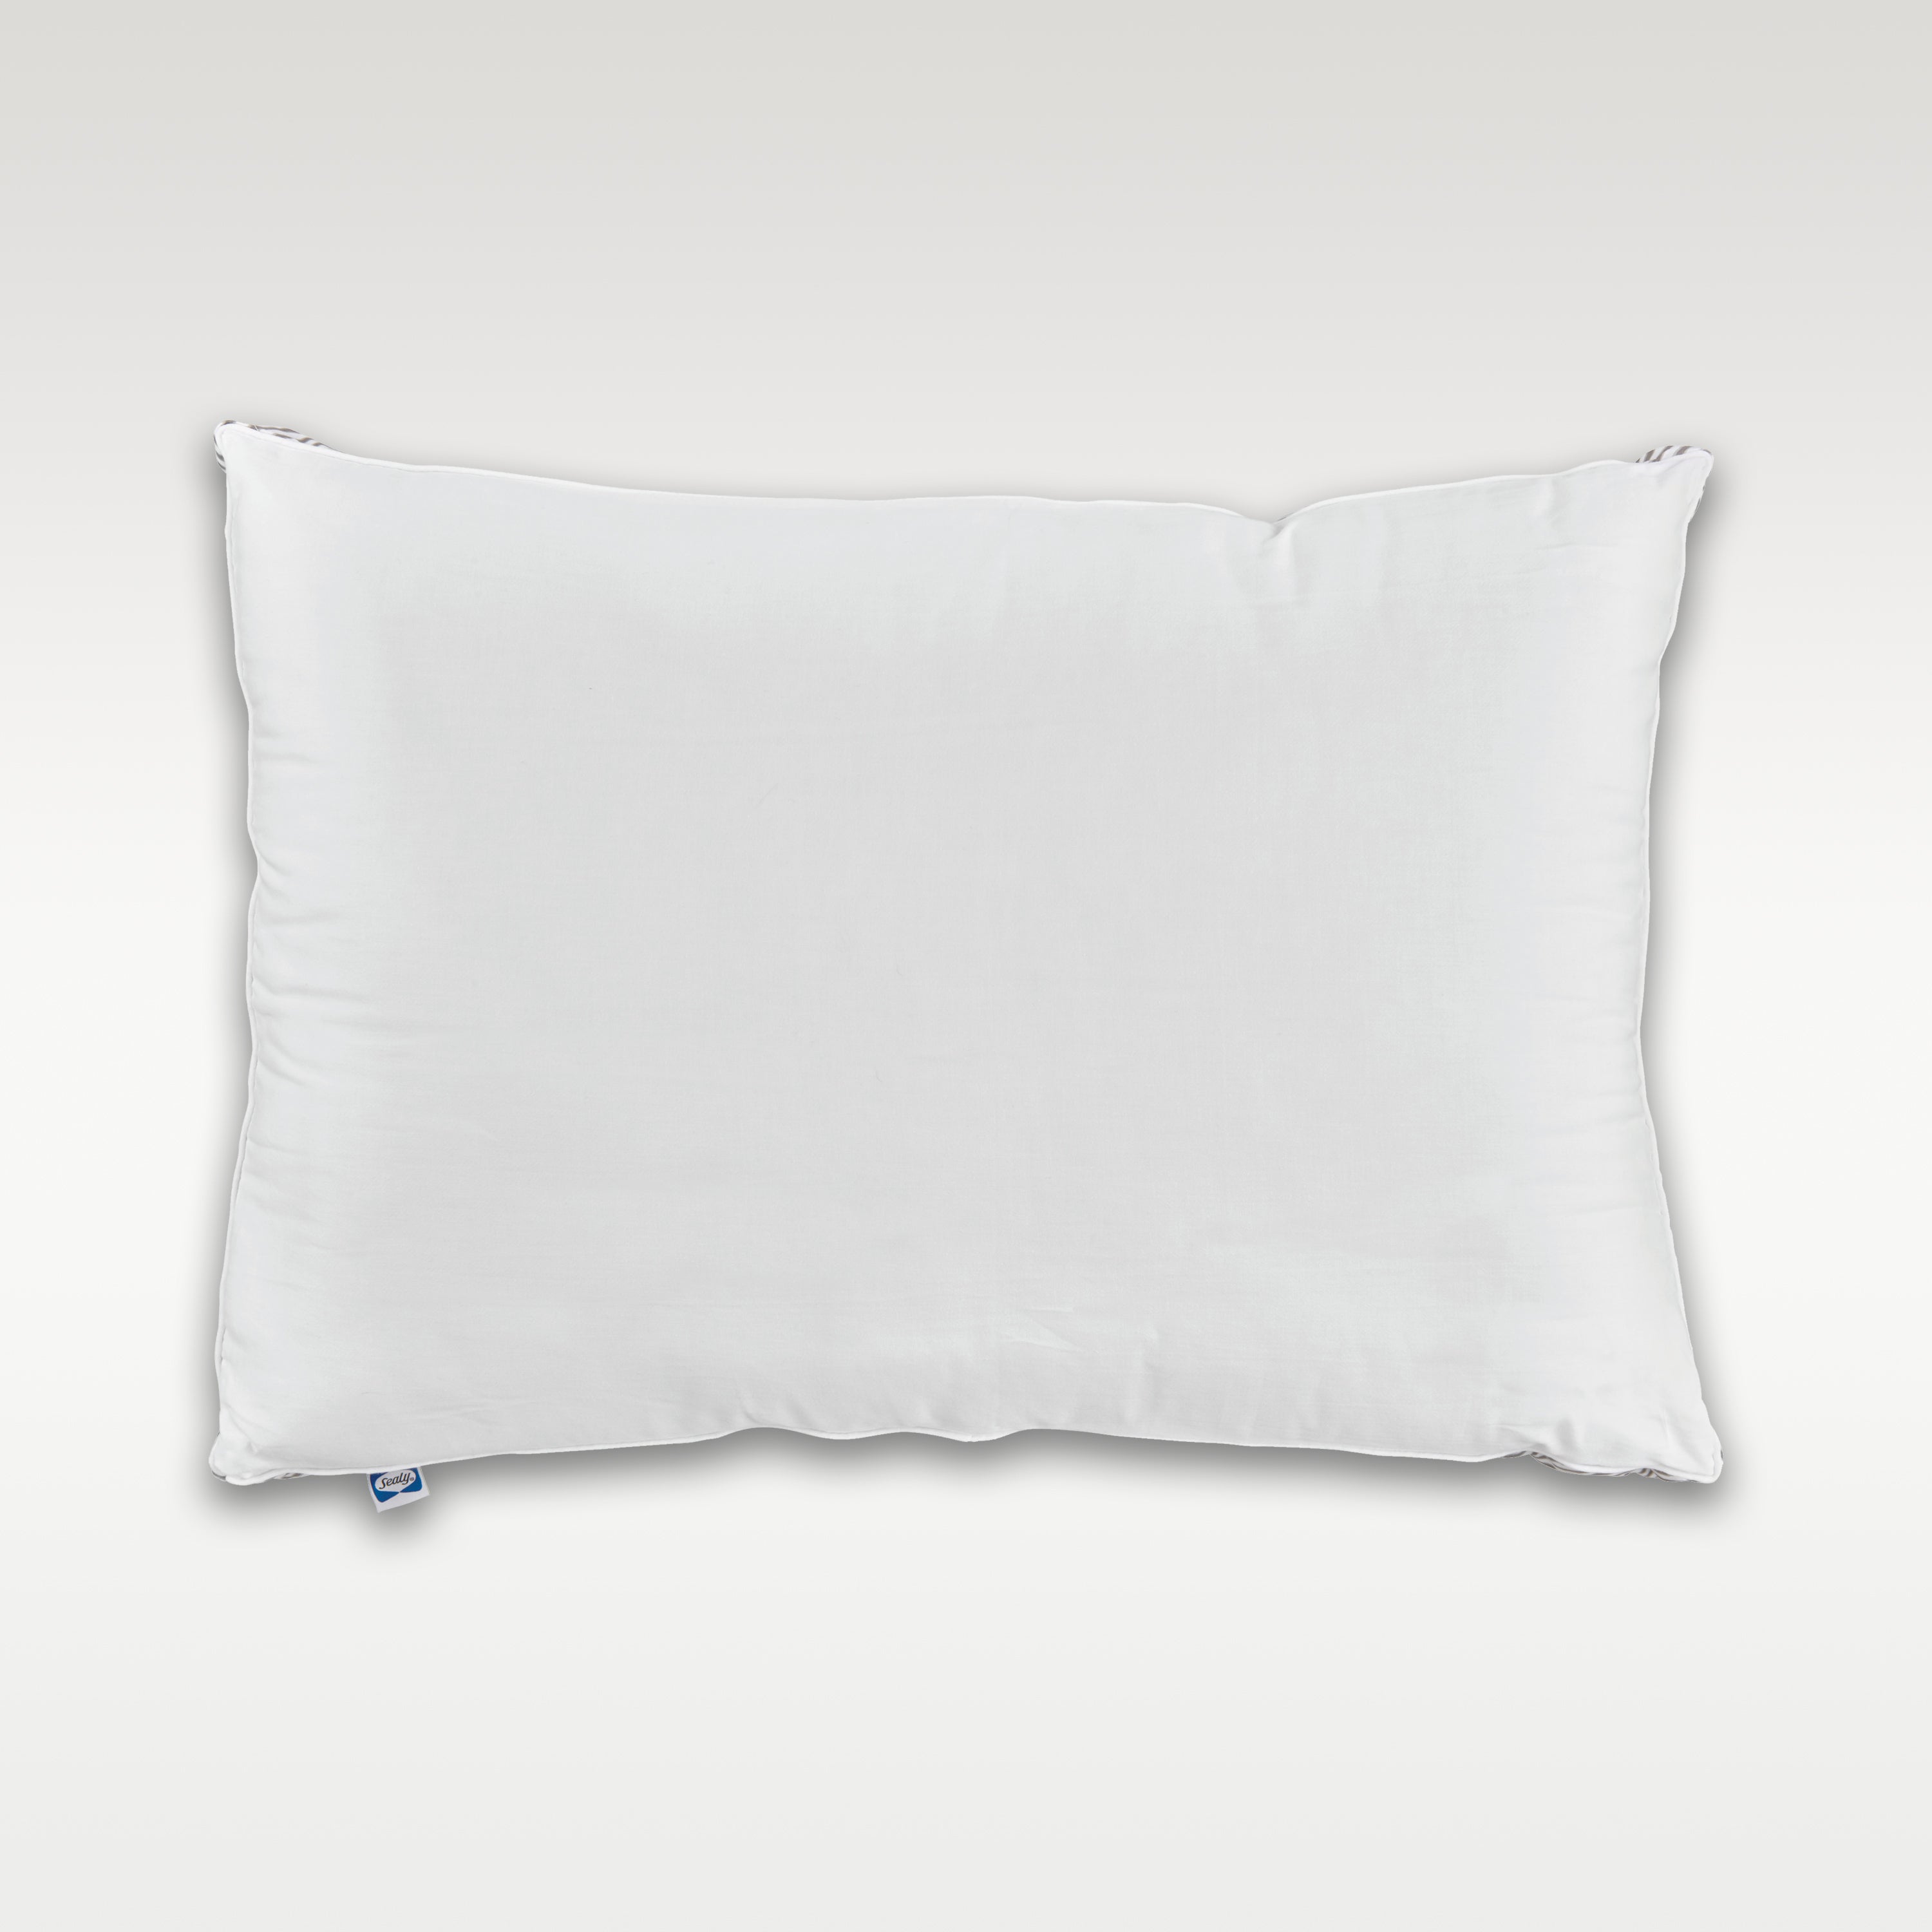 Sealy  Firm Support Pillow